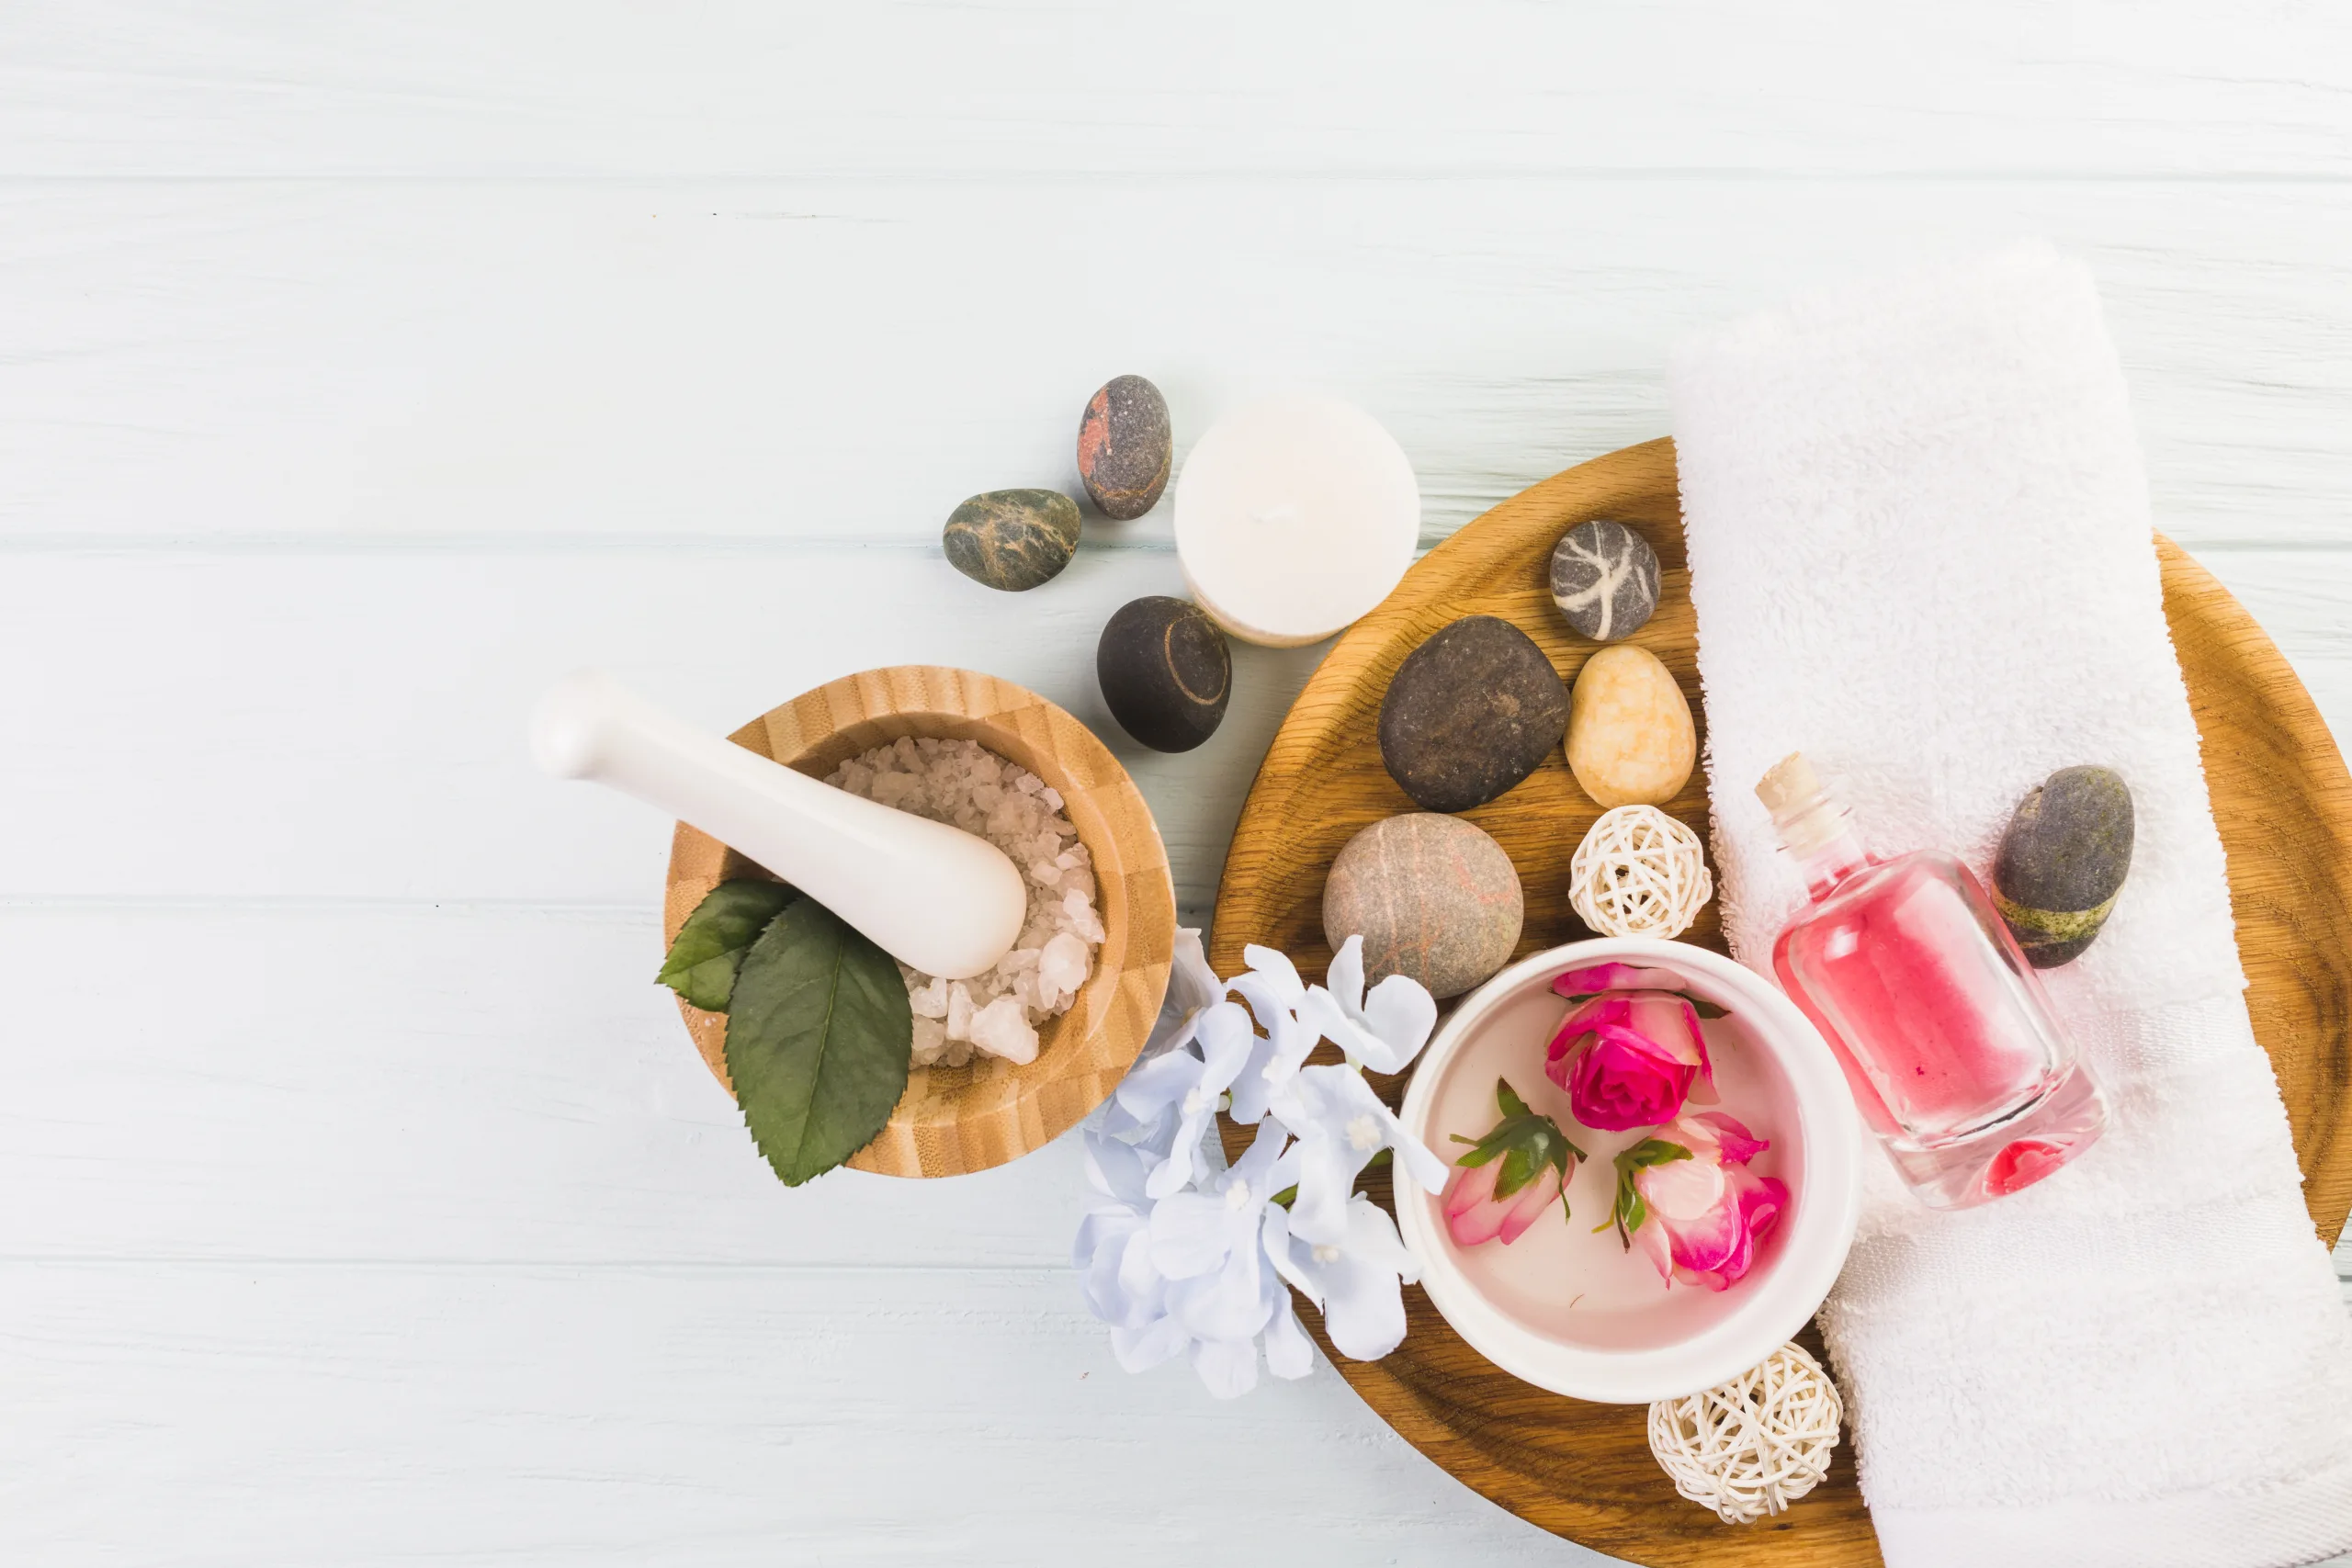 elevated-view-spa-stones-salt-towel-flowers-oil-white-background